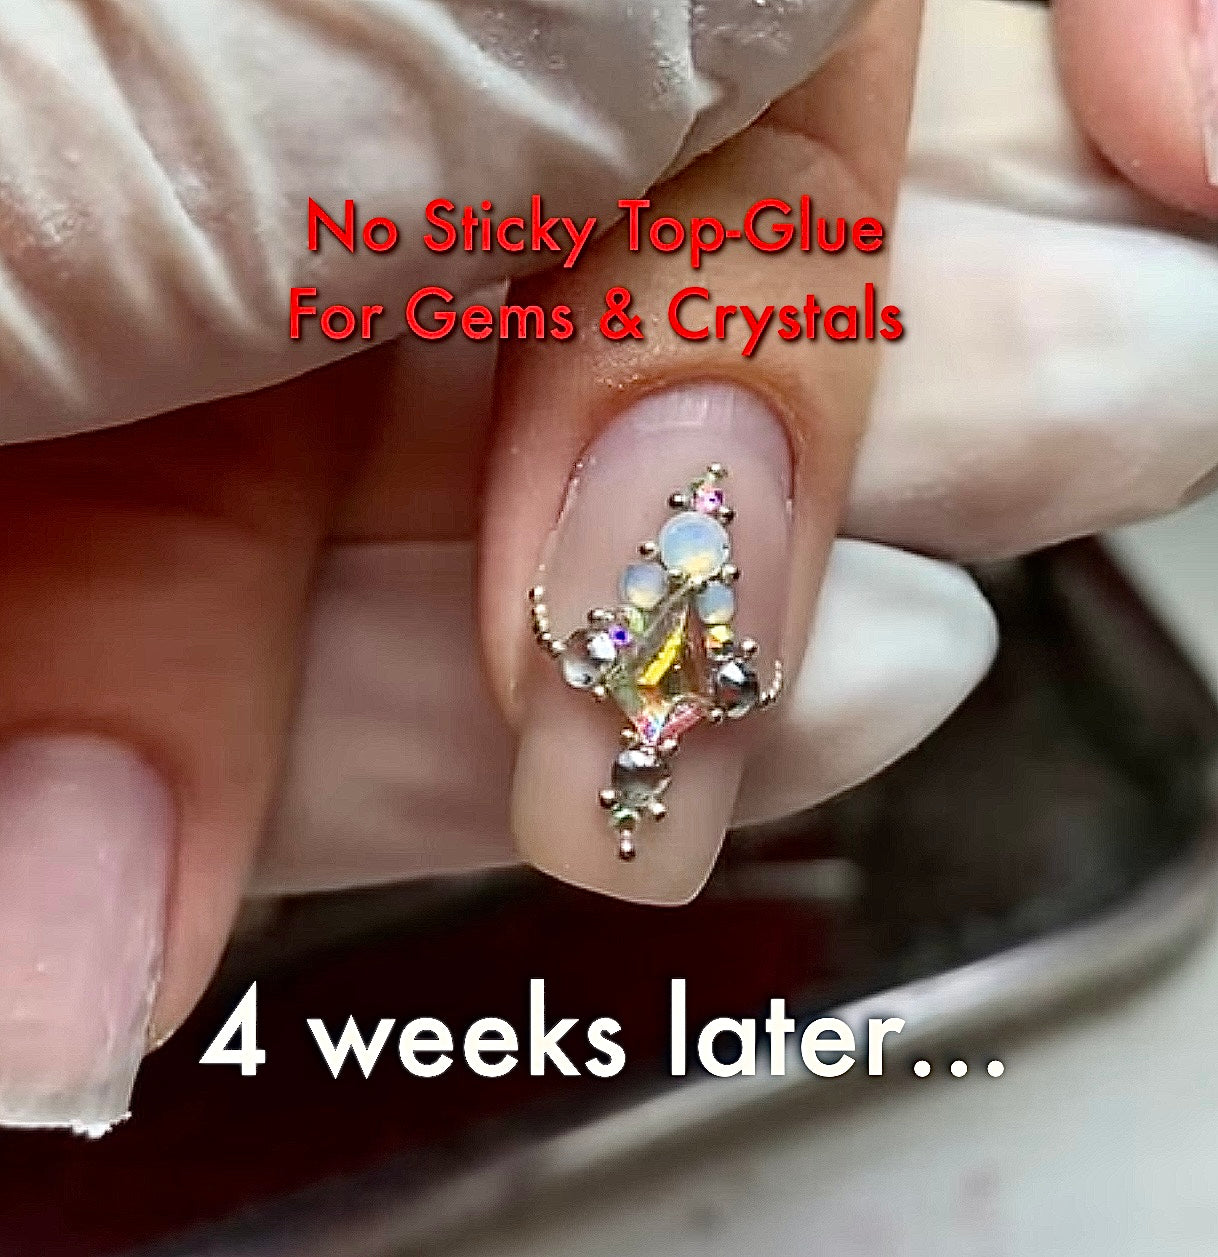 Crystal Nails USA - ❓ Did You Know ❓ The Gem Glue Gel is a